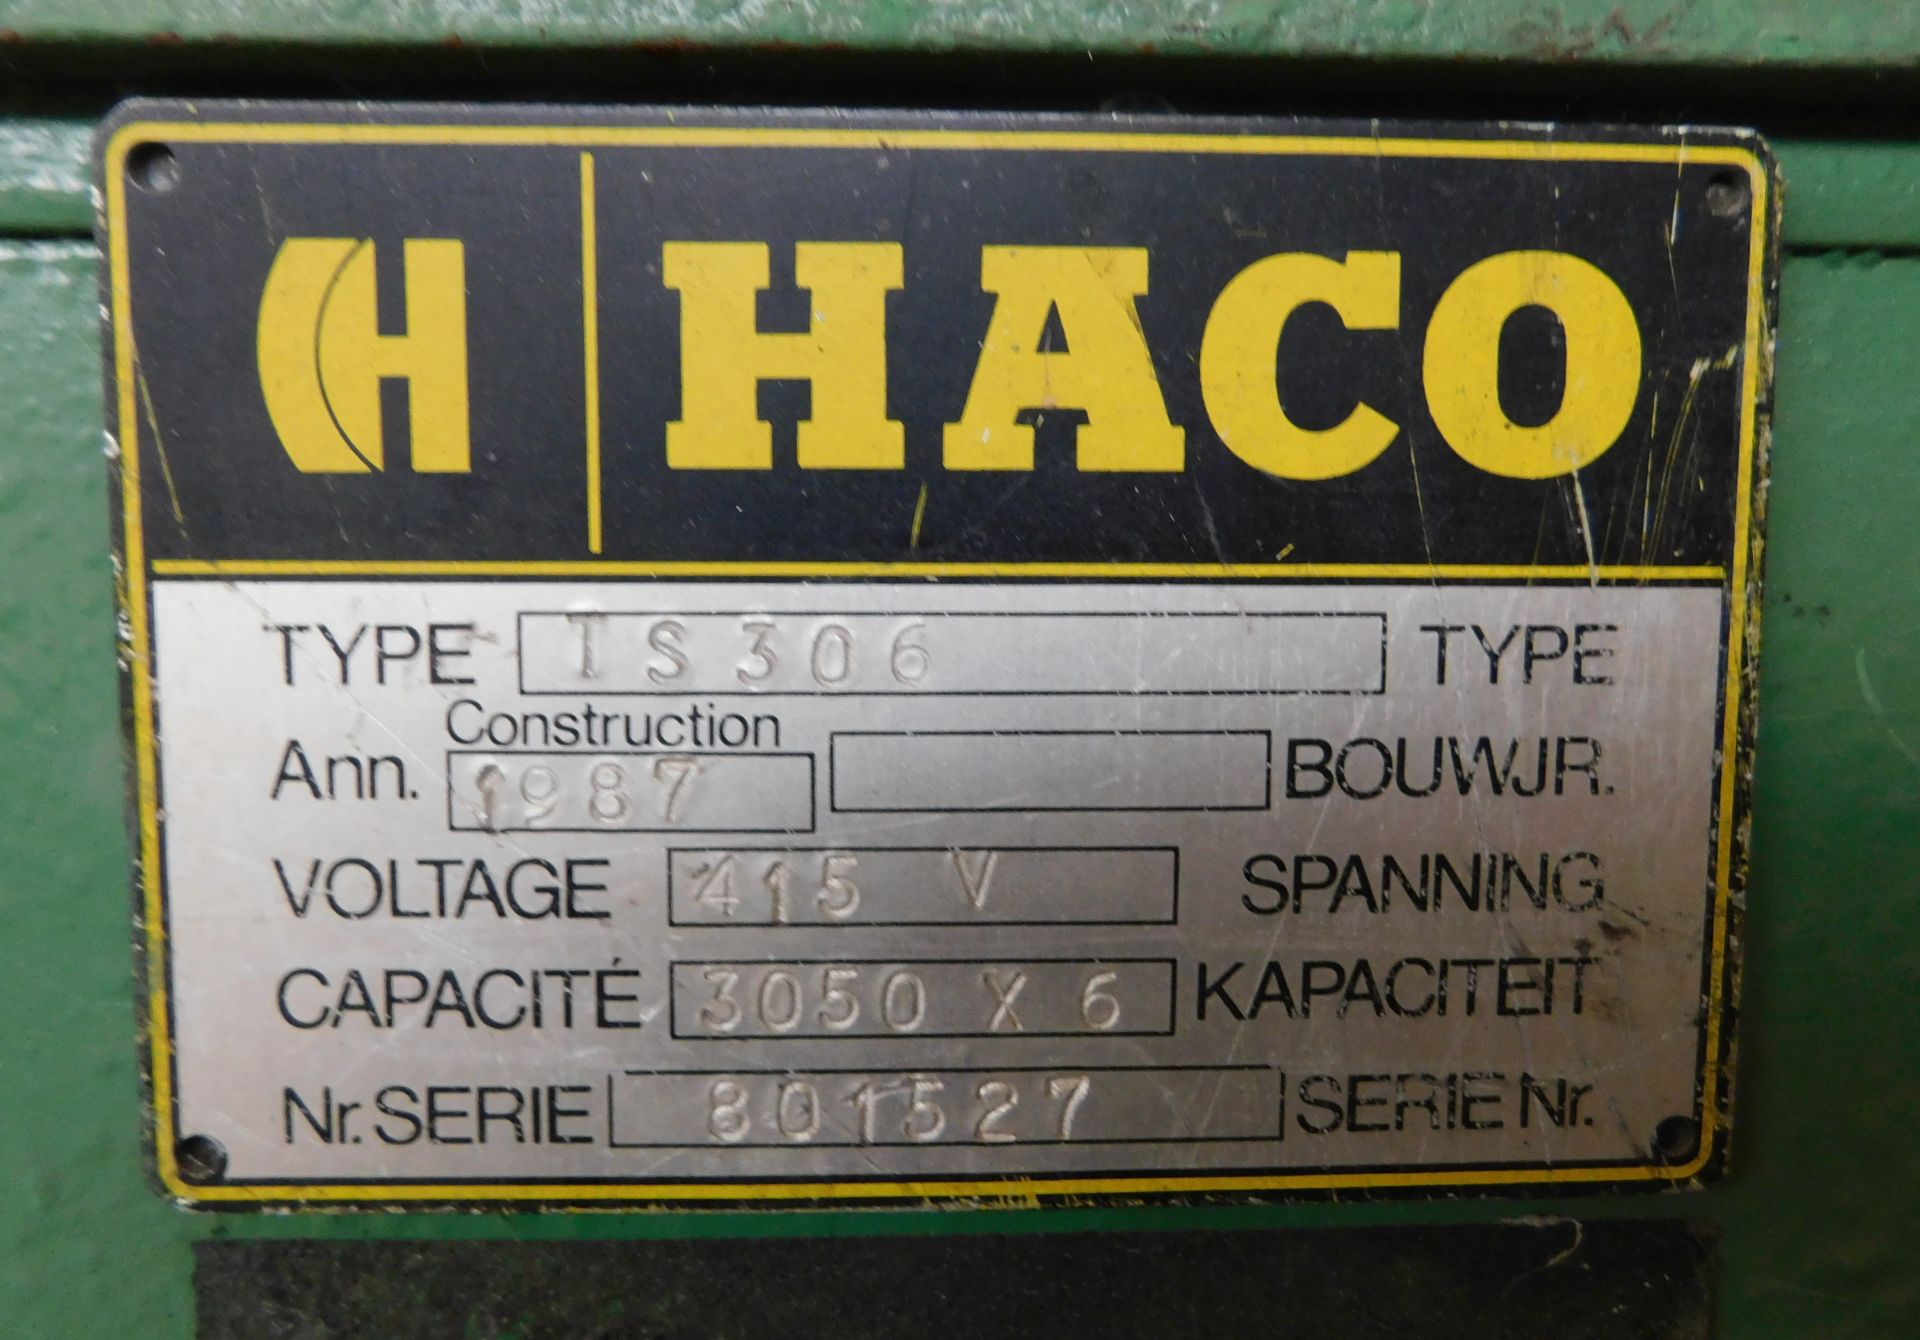 Haco TS306 Hydraulic Guillotine, Capacity 3050mm X 6mm, s/n 801527 - Image 3 of 4